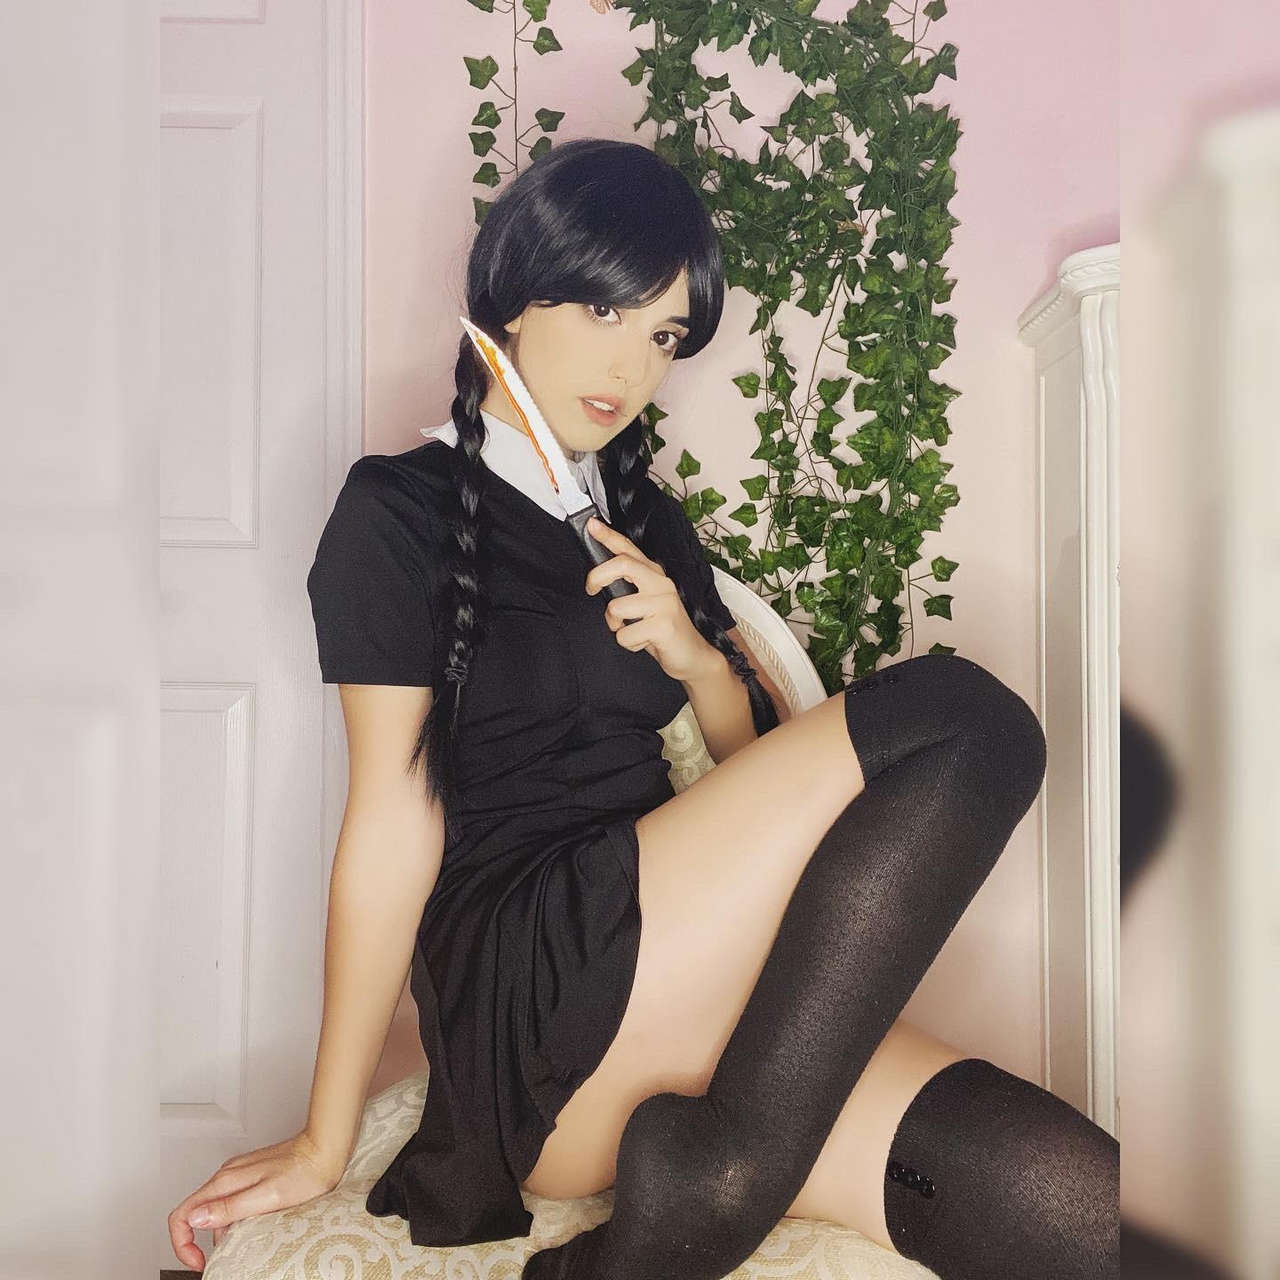 Lunasenpia As Wednesday Addams From The Addam